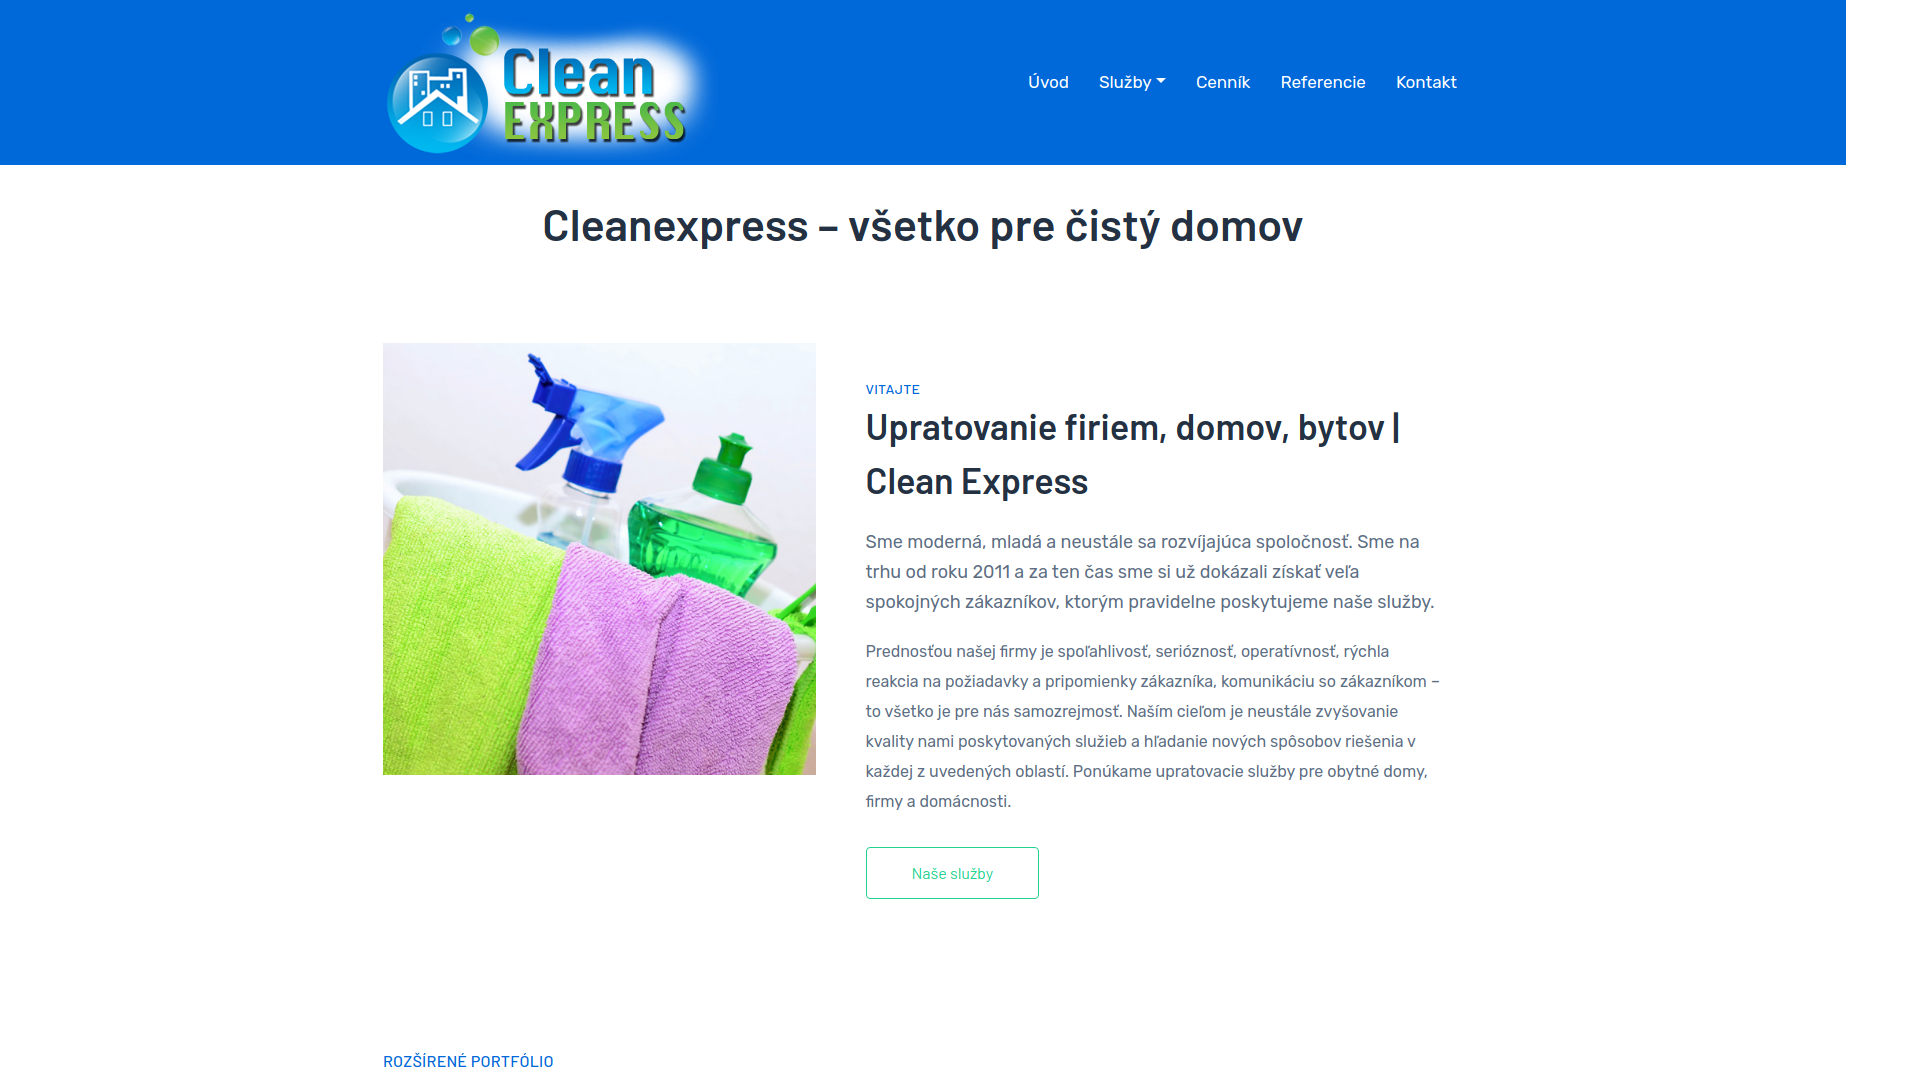 cleanexpress.sk